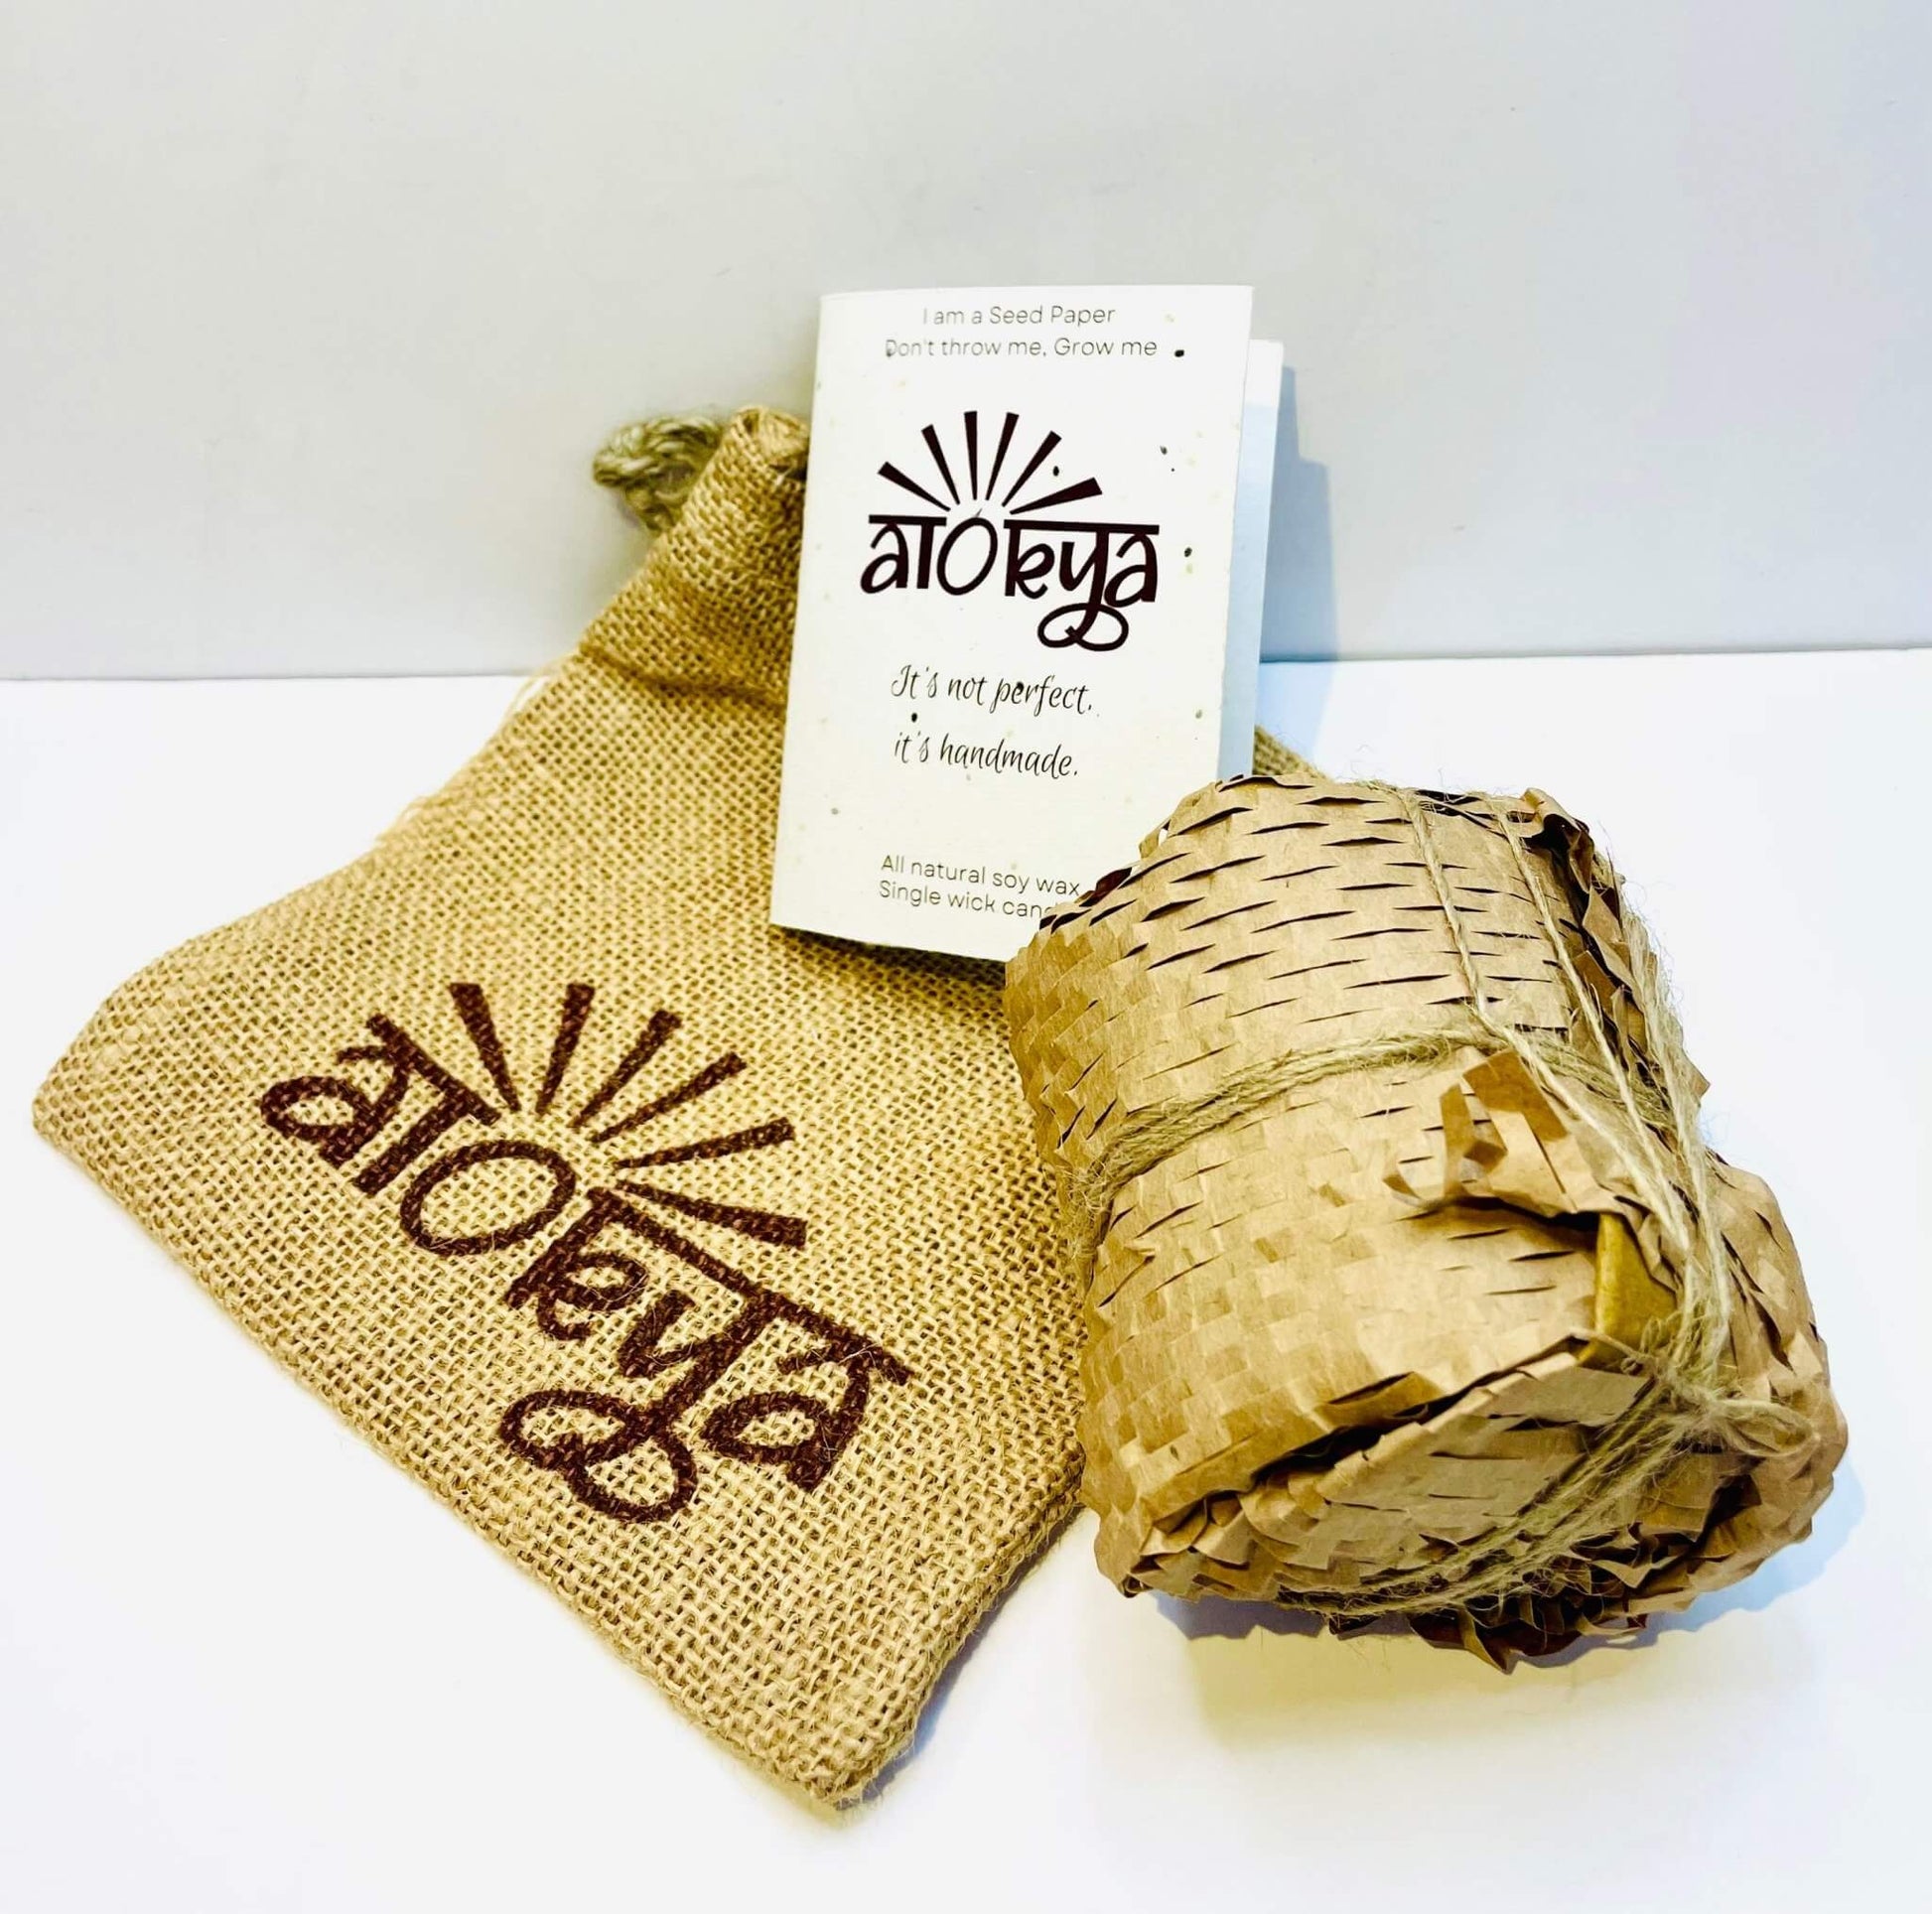 A 100% natural soy wax-scented candle wrapped in honeycomb paper is placed near a seed paper information card and jute bag.